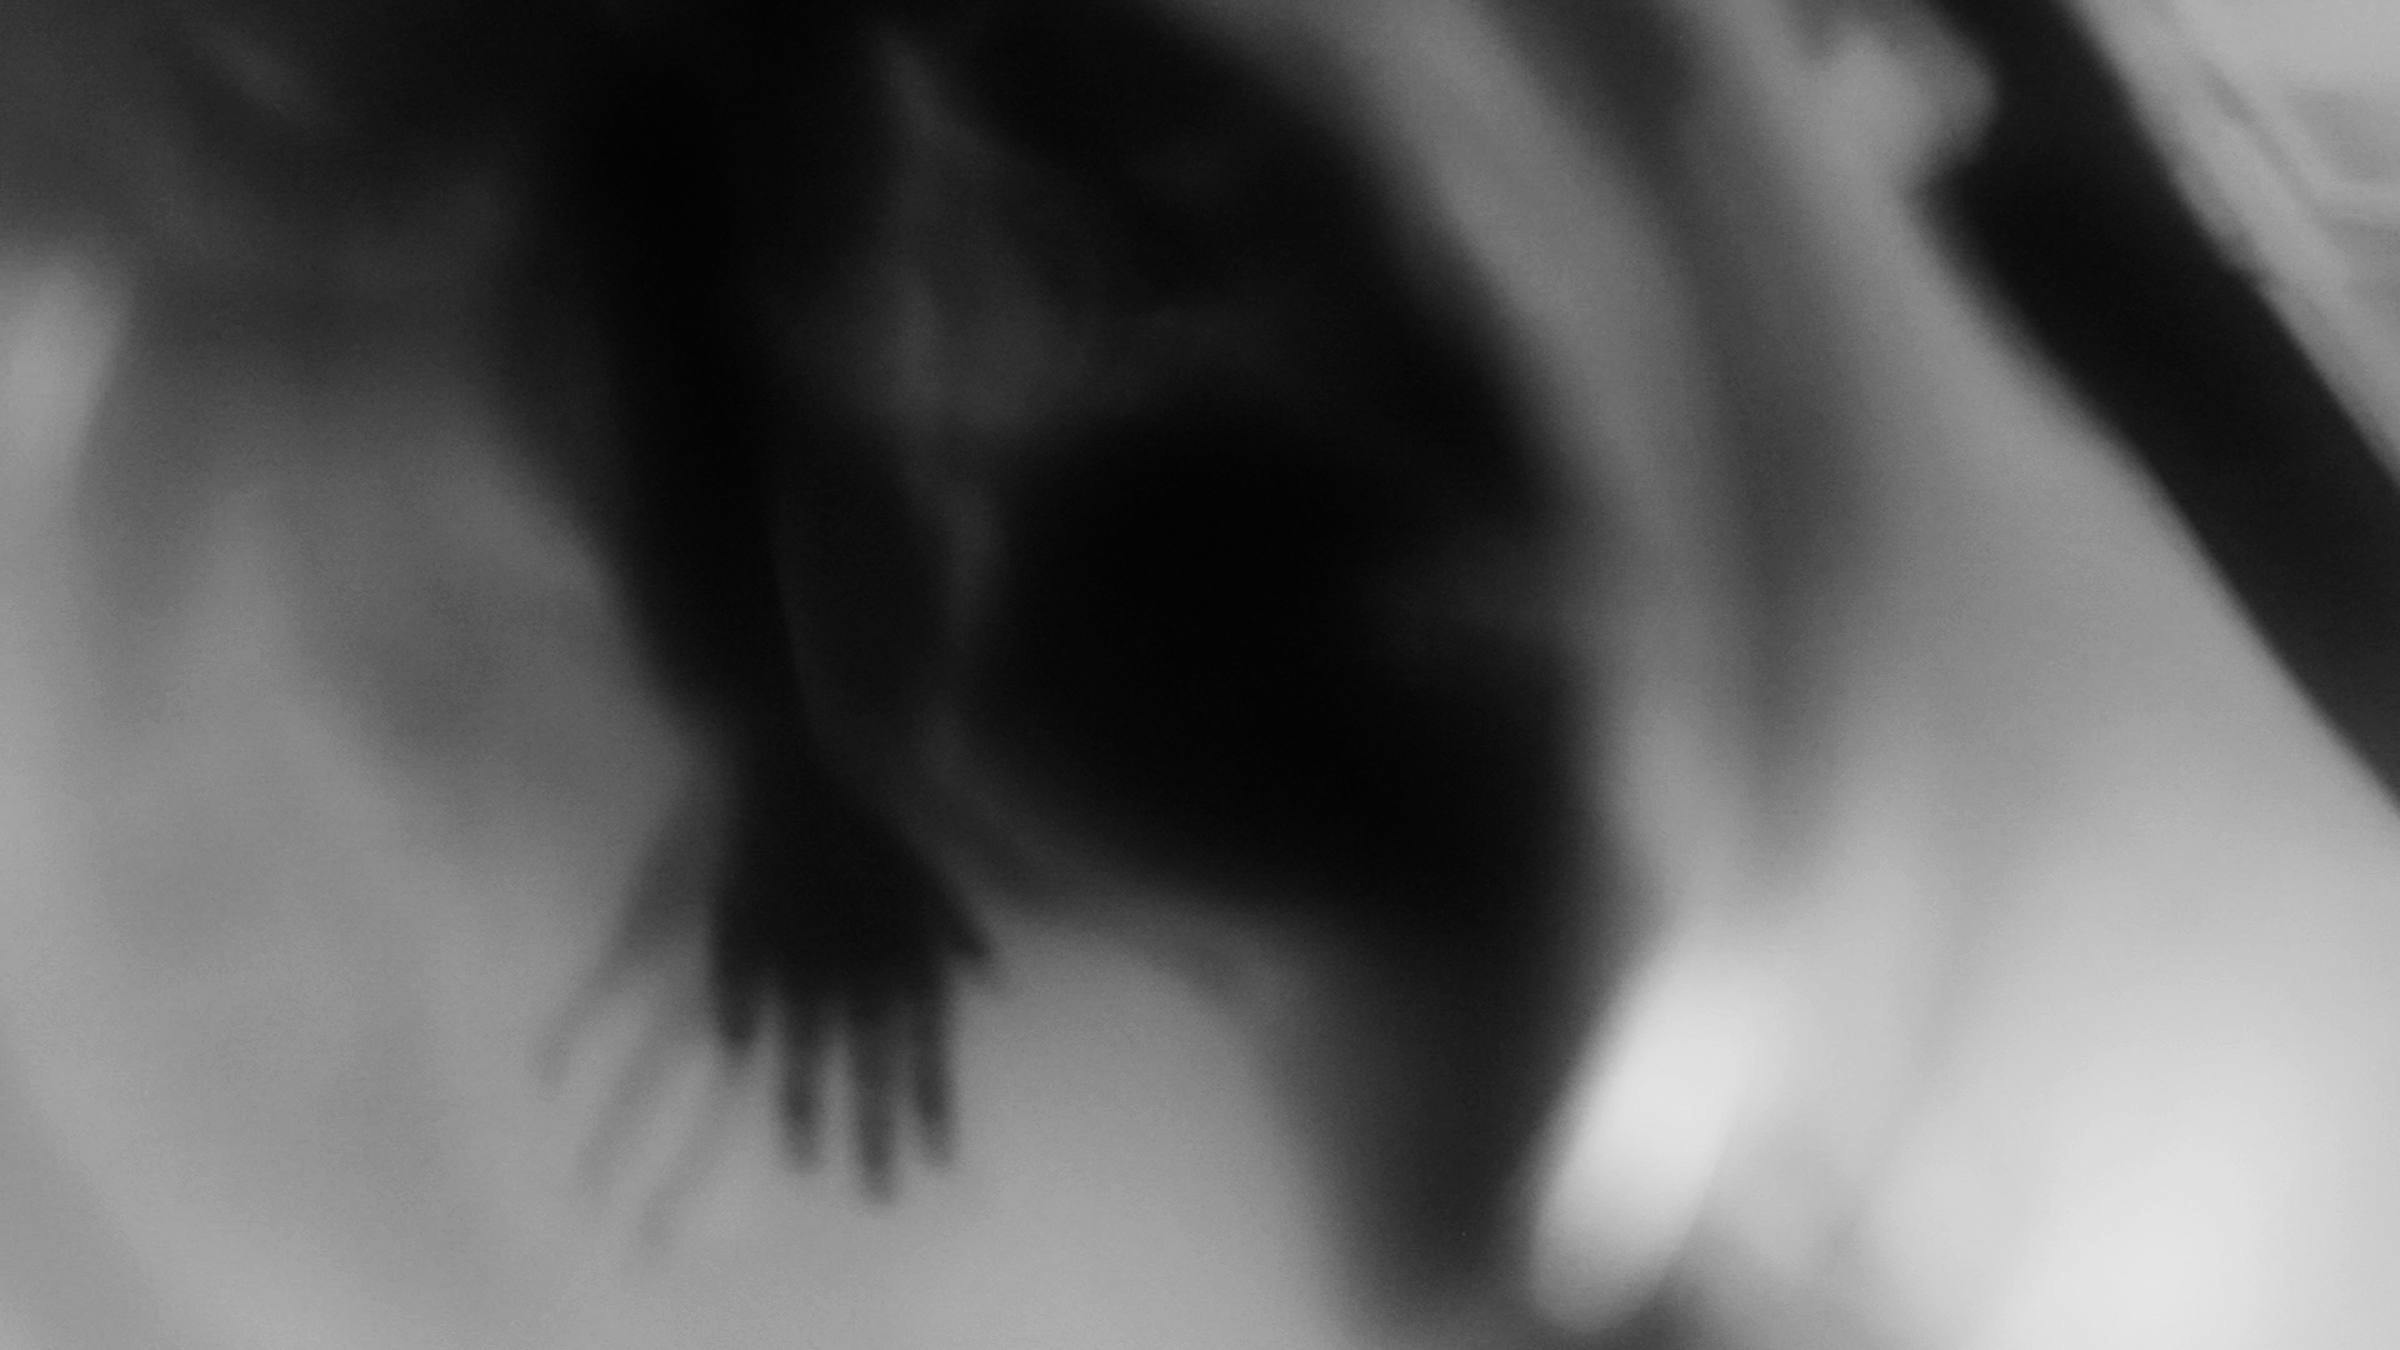 Black and white image of ghostly forms, including two outsretched hands.